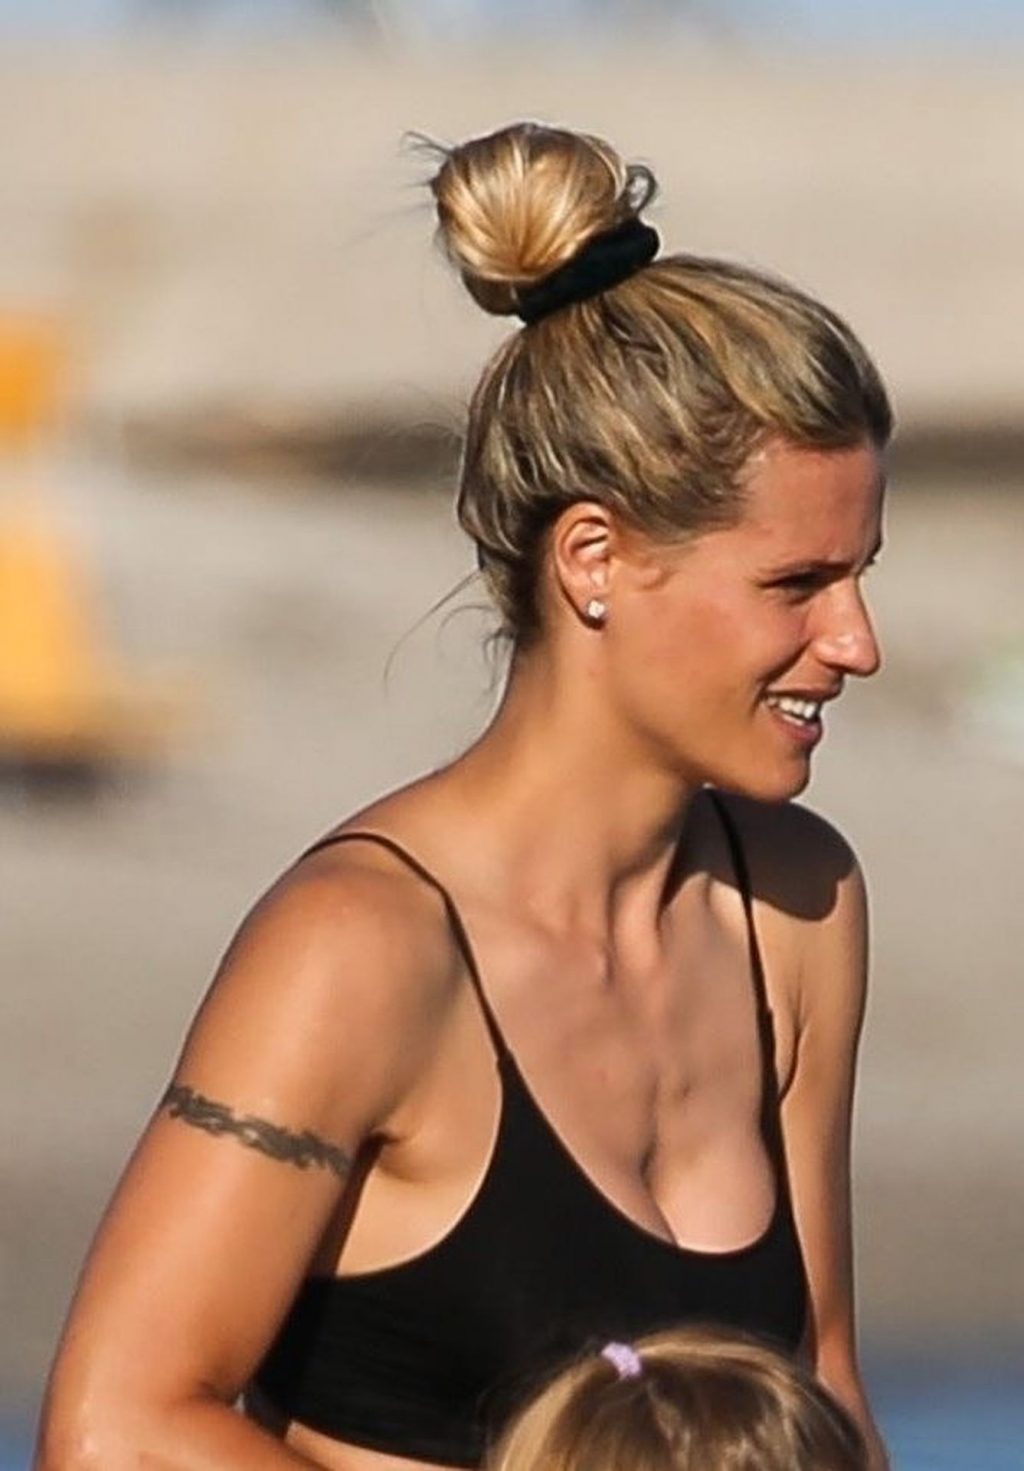 Michelle Hunziker Enjoys a Day on the Beach with Her Family (13 Photos)